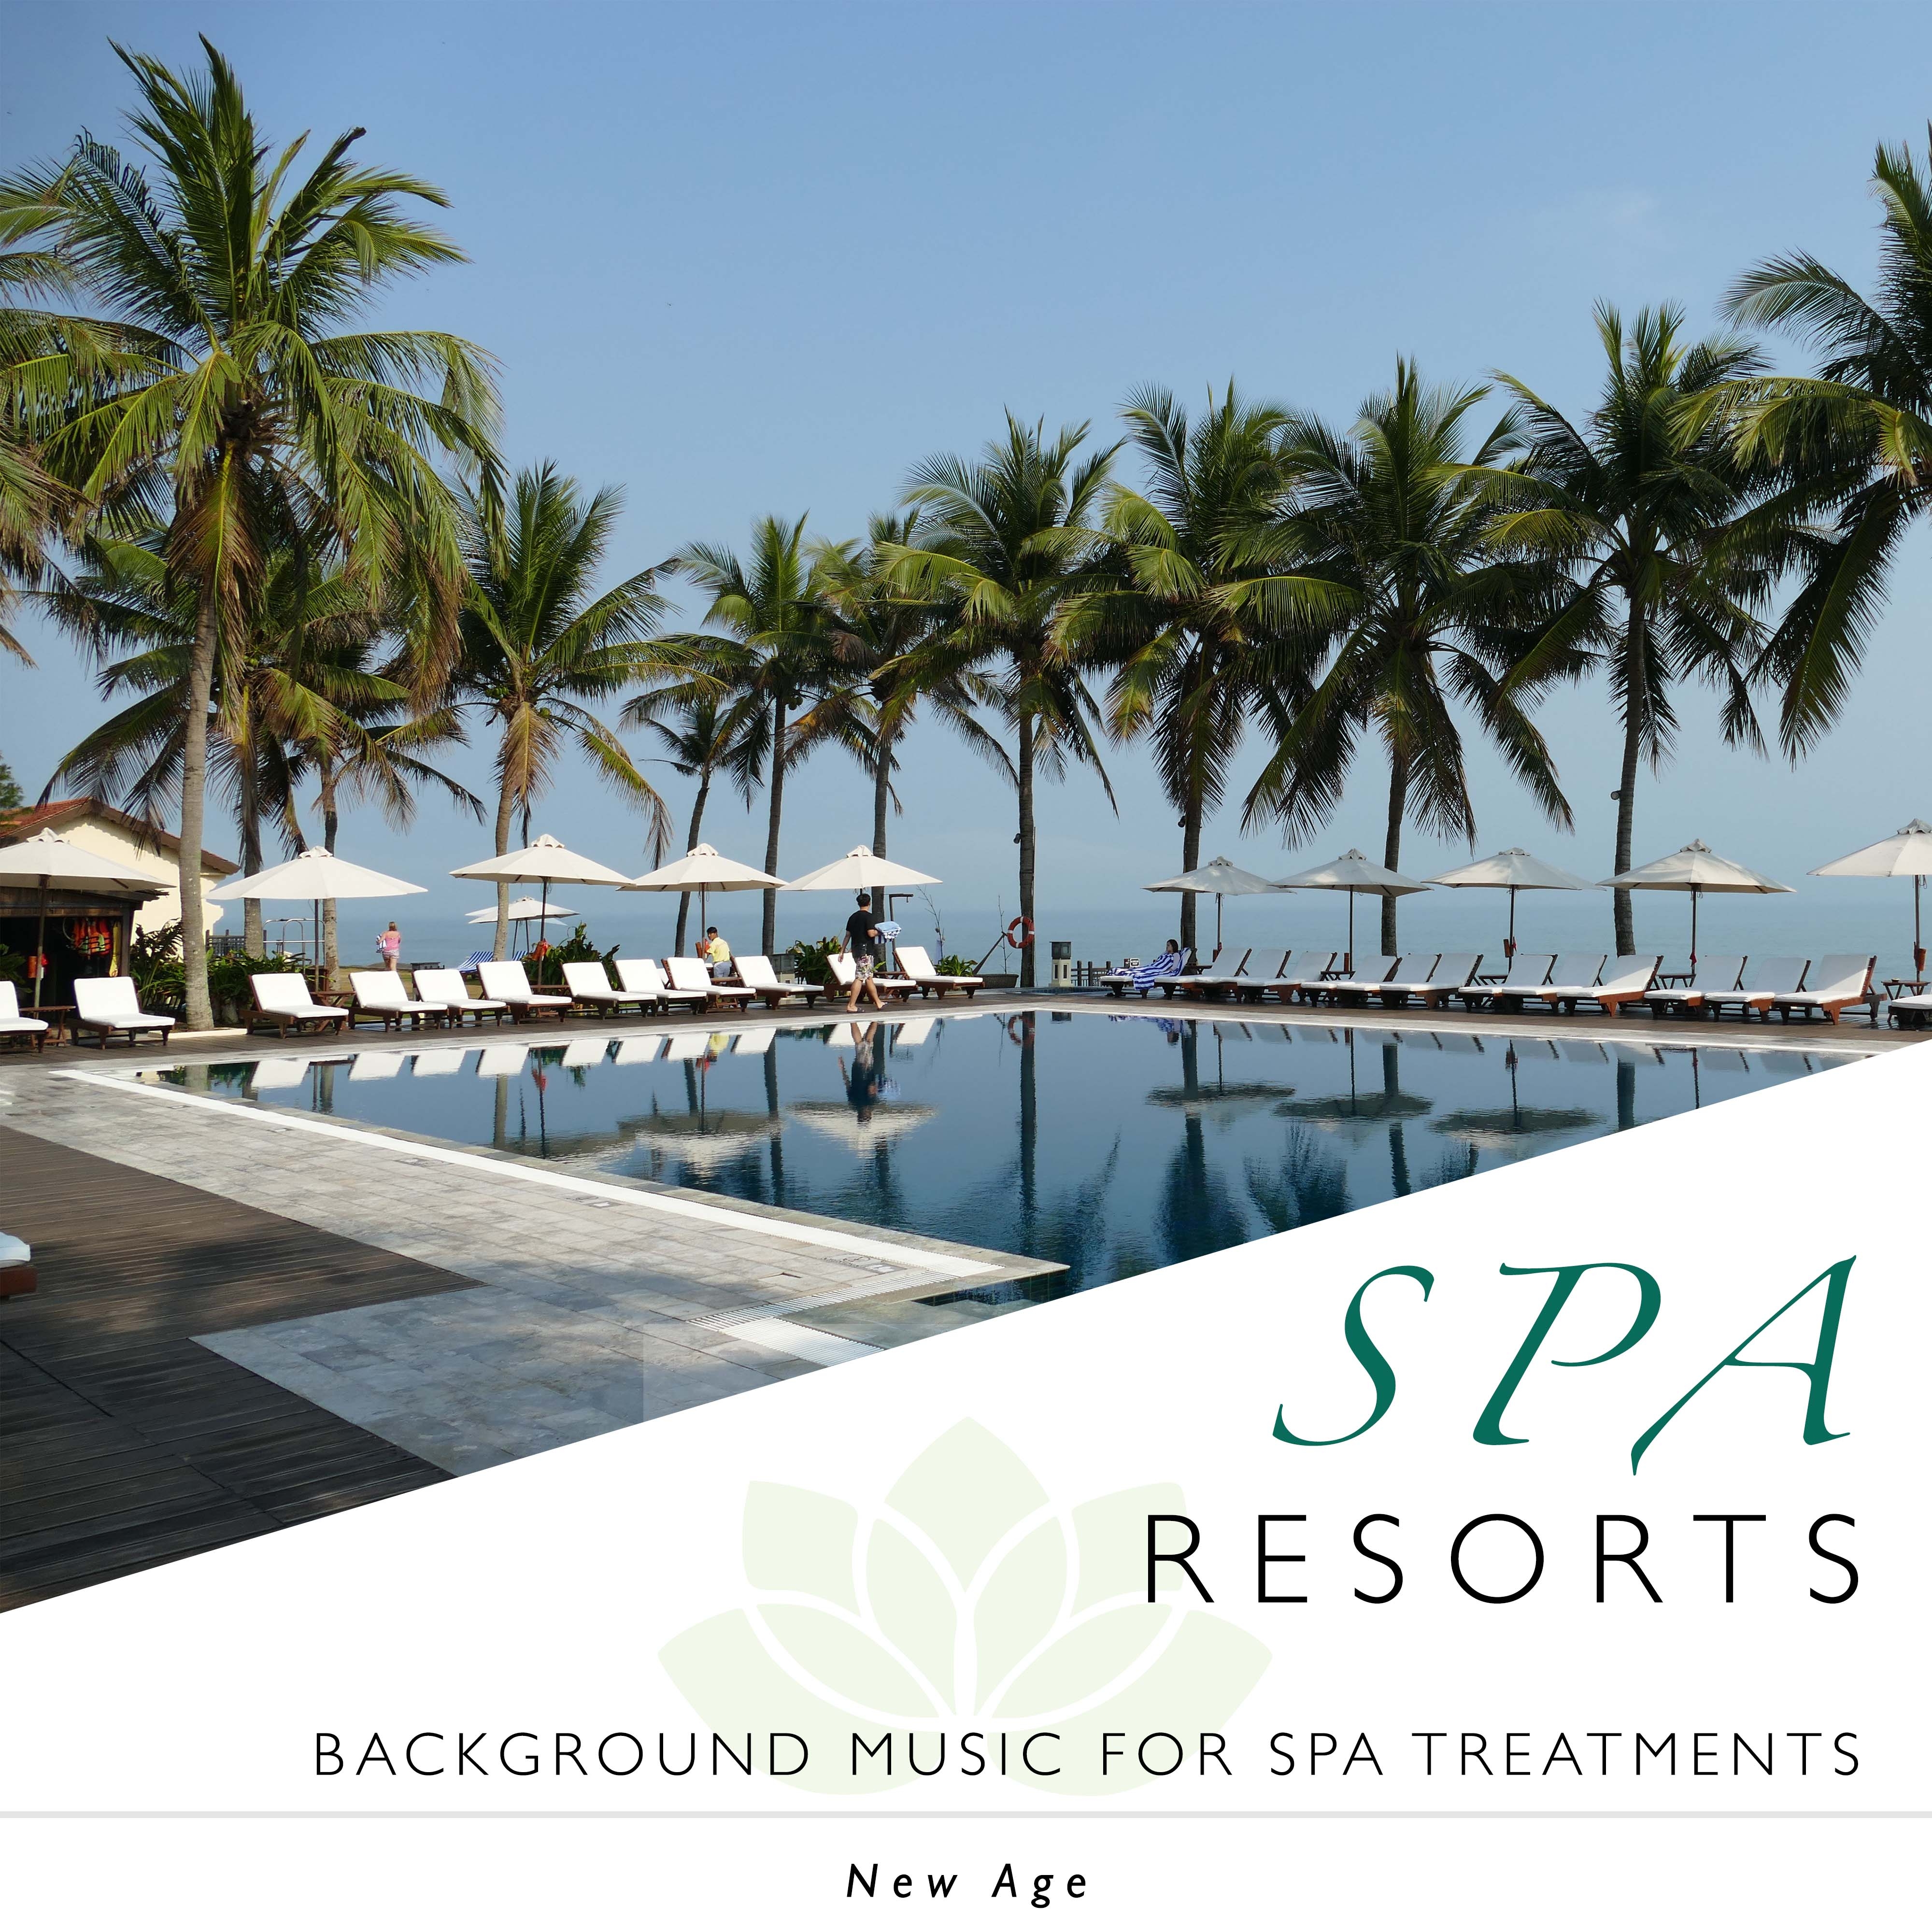 Spa Resorts - Background Relaxing Music for Spa Treatments (Aromatherapy, Body Scrub, Bathing, Hot spring, Thermae, Mud bath, Sauna, Massage and Facials)